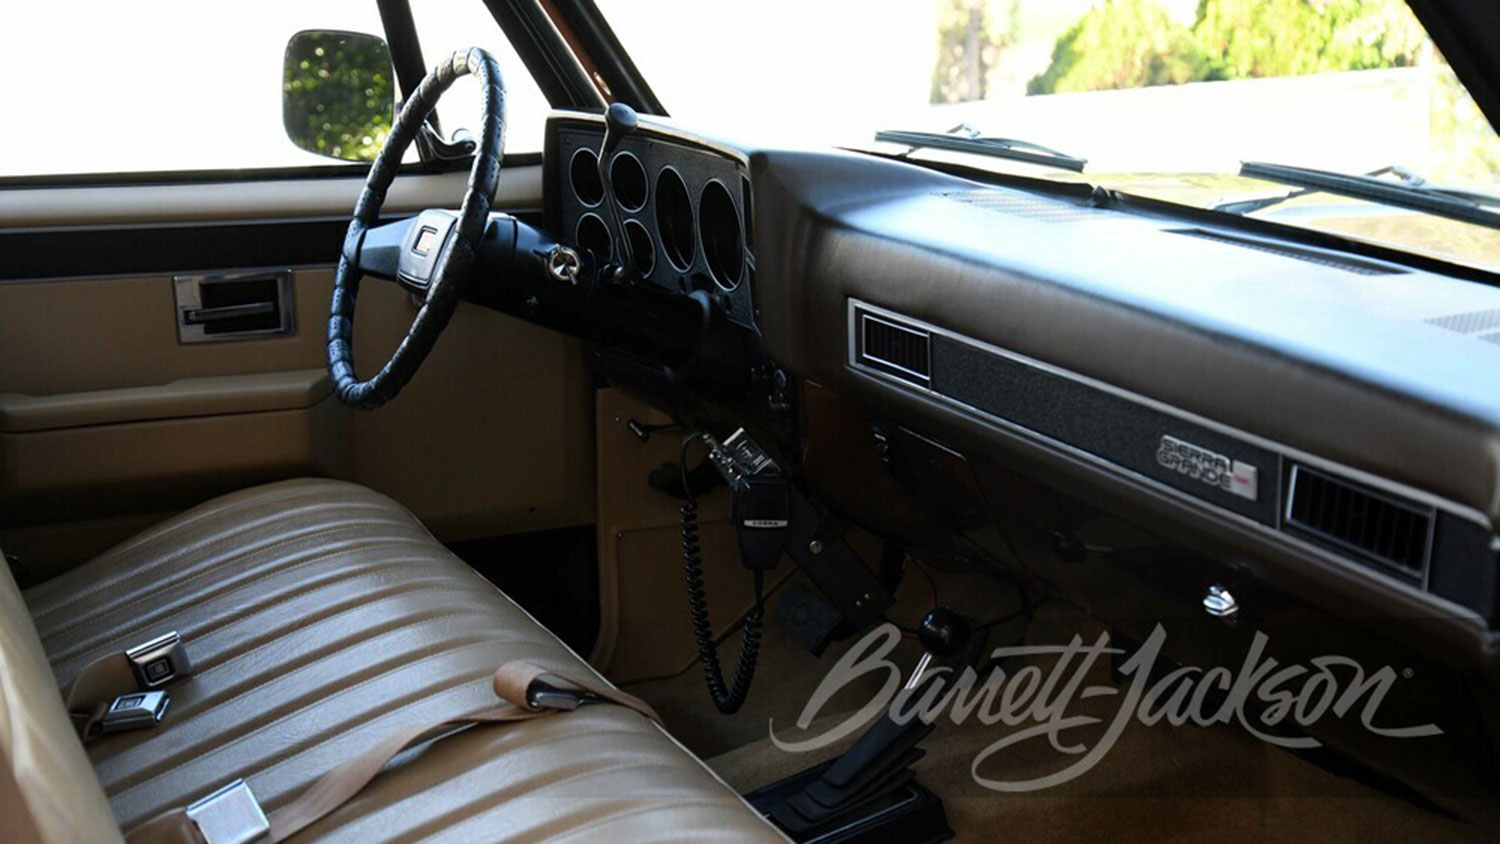 1984 Chevy Pickup 'Fall Guy' Recreation Auction Bound